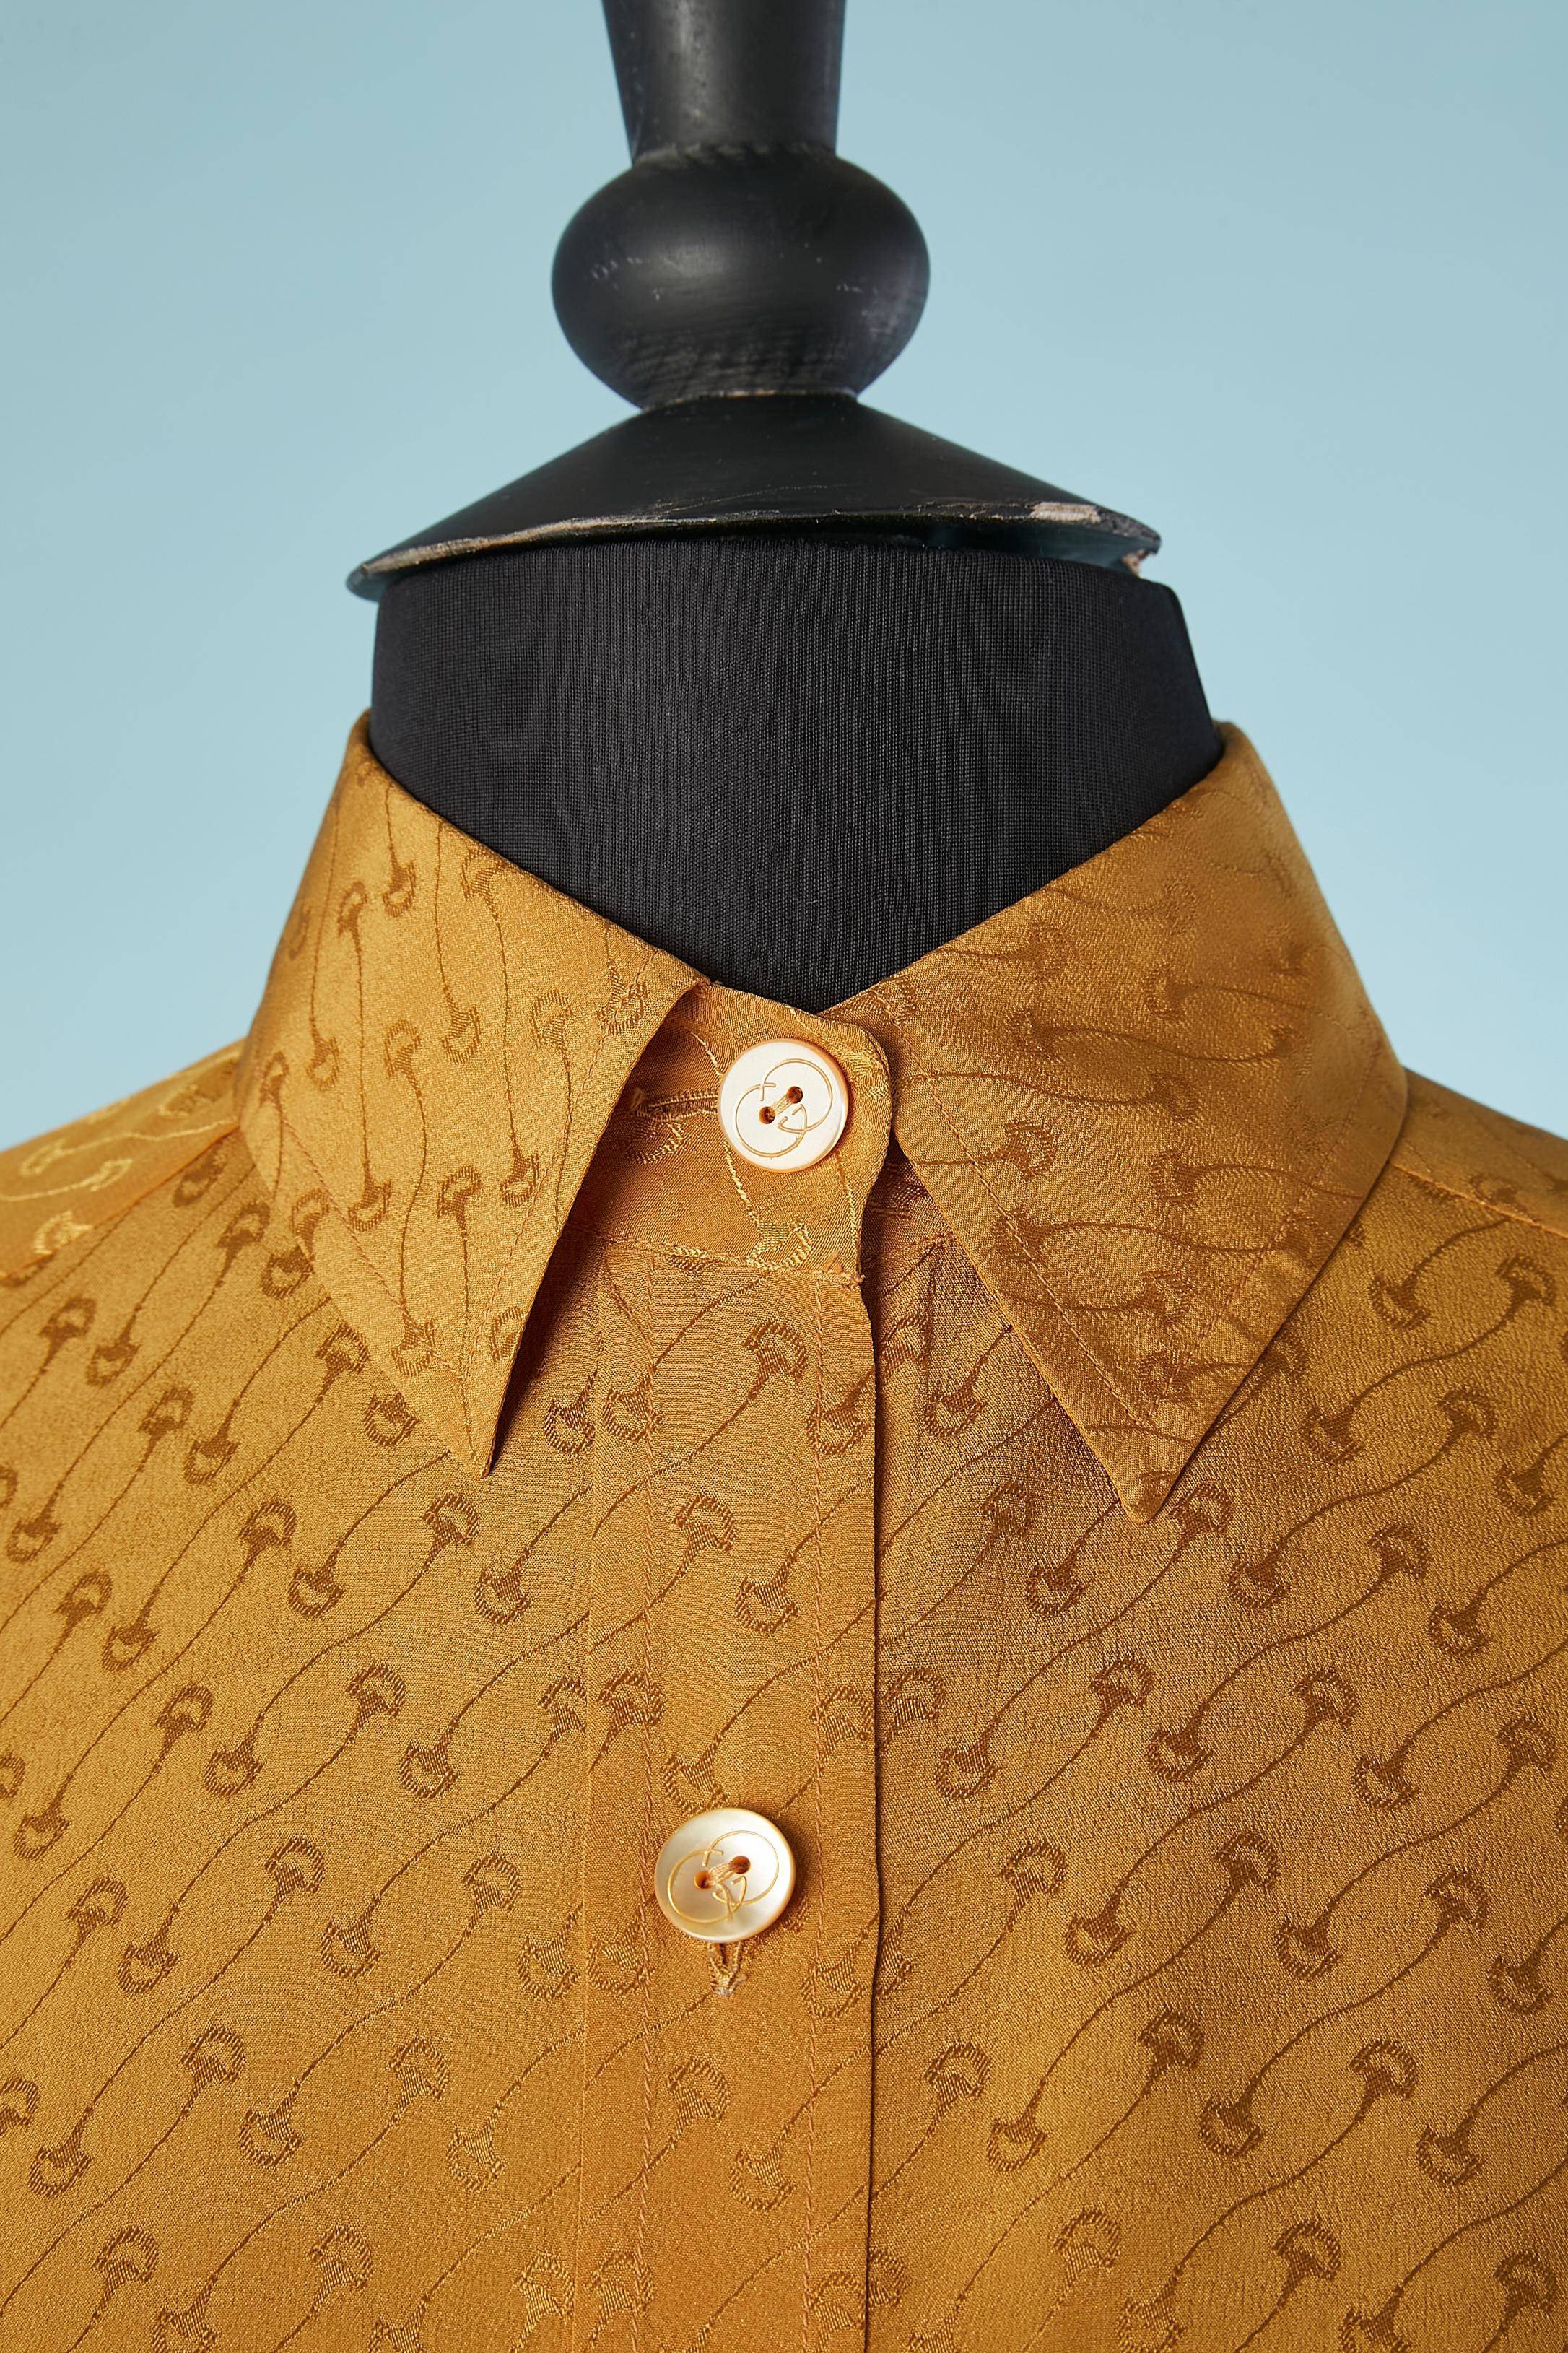 Mustard silk jacquard shirt. Branded buttons. 
Shoulder pads. Box pleat on the side in the front and back.

Guccio Giovanbattista Giacinto Dario Maria Gucci (26 March 1881 – 2 January 1953) was an Italian businessman and fashion designer. He is